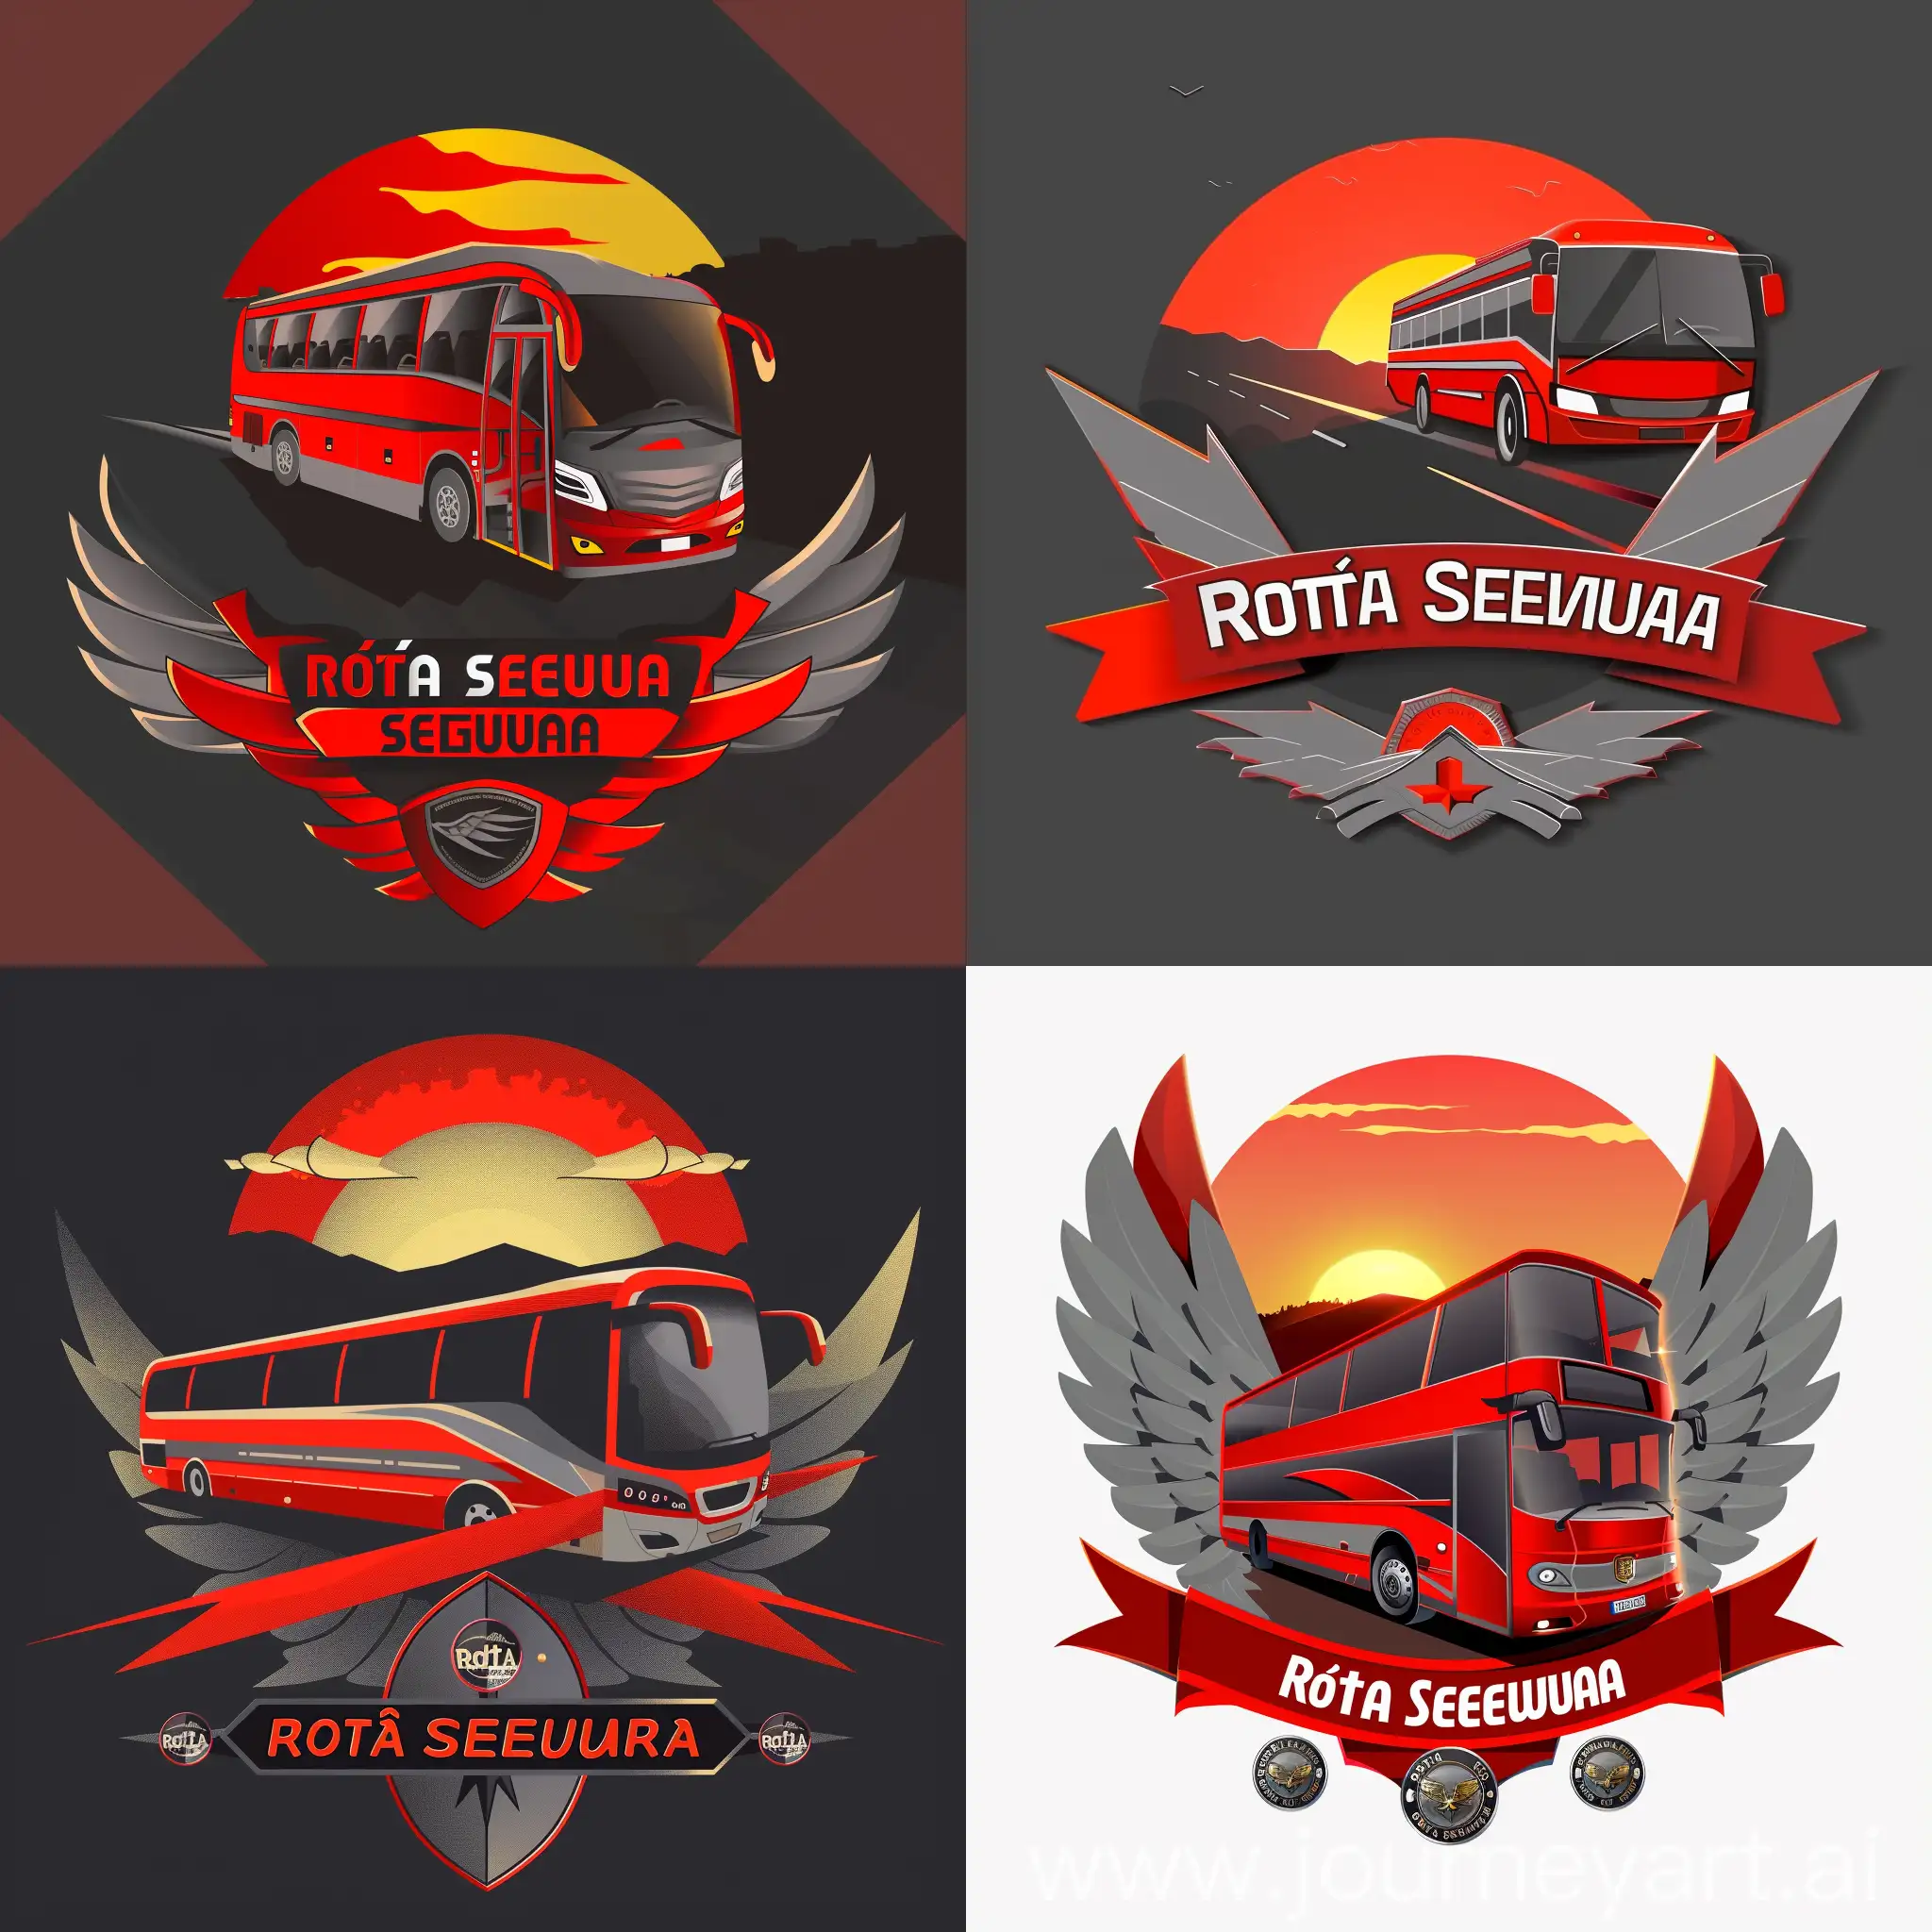 a realistic logo, beautiful red bus with gray details, going diagonal, and sunset behind, "Rota Segura" text below, use badges, very small wings, red and gray as main colours